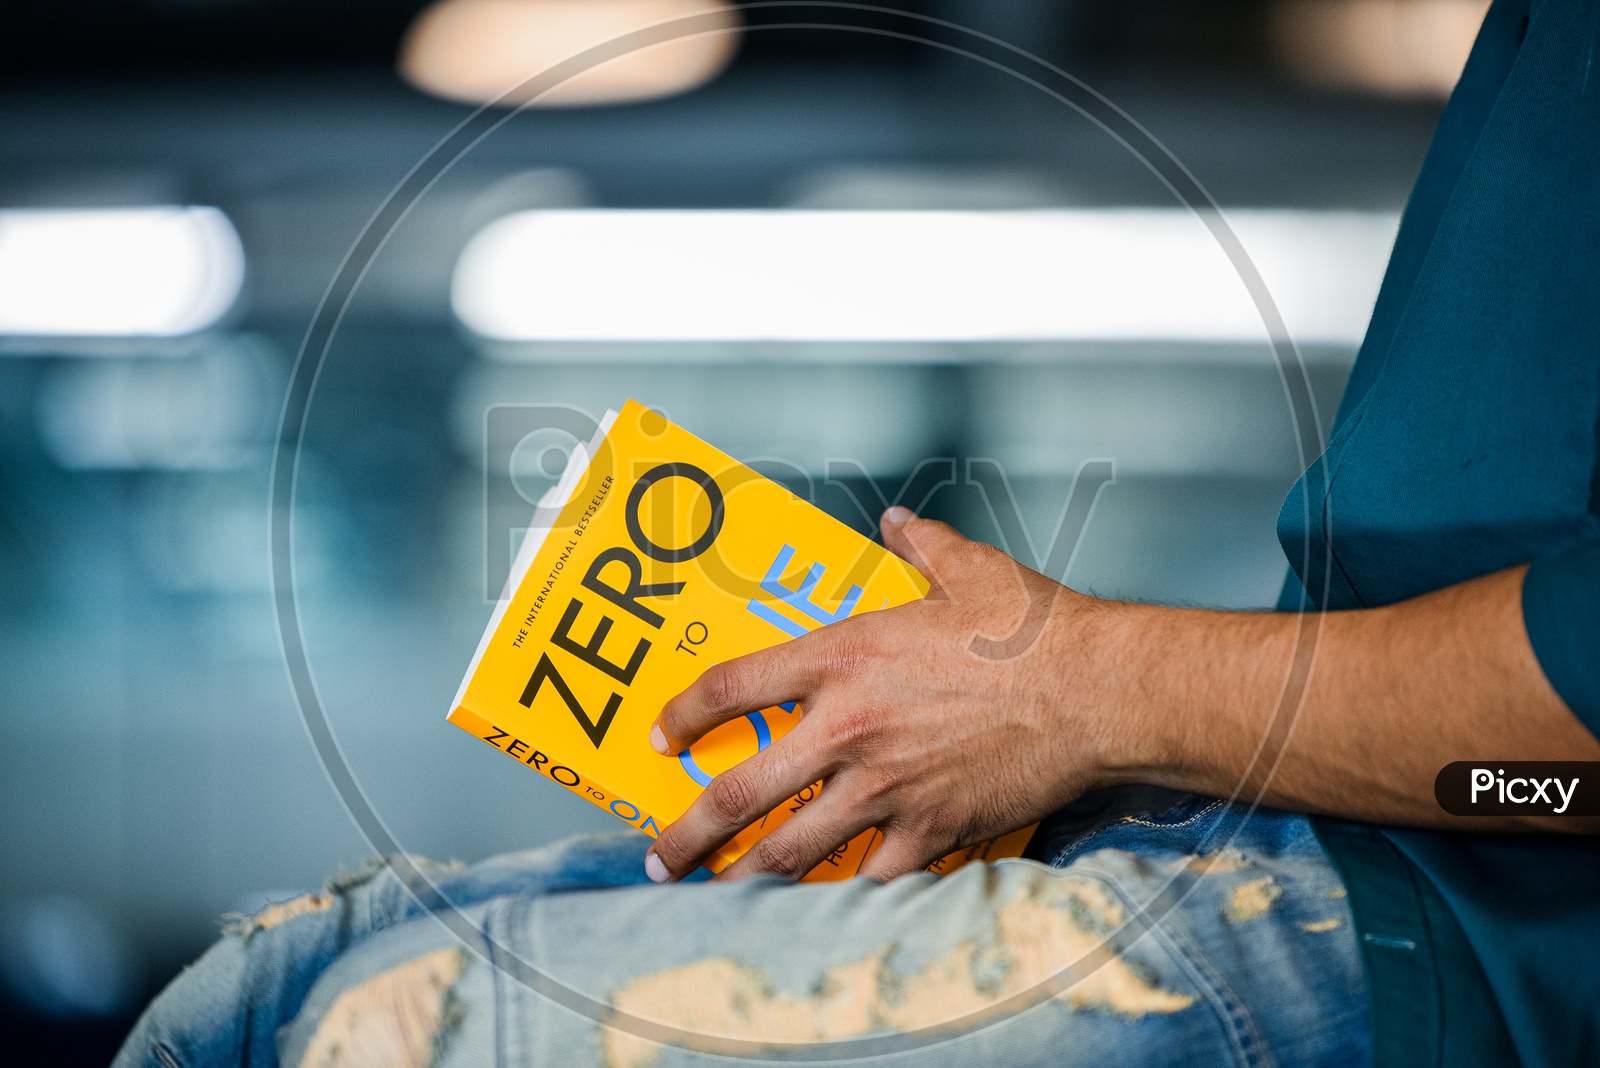 Young Man or Indian Man Or Student Reading Book Sitting Leisure  Closeup Of Hands